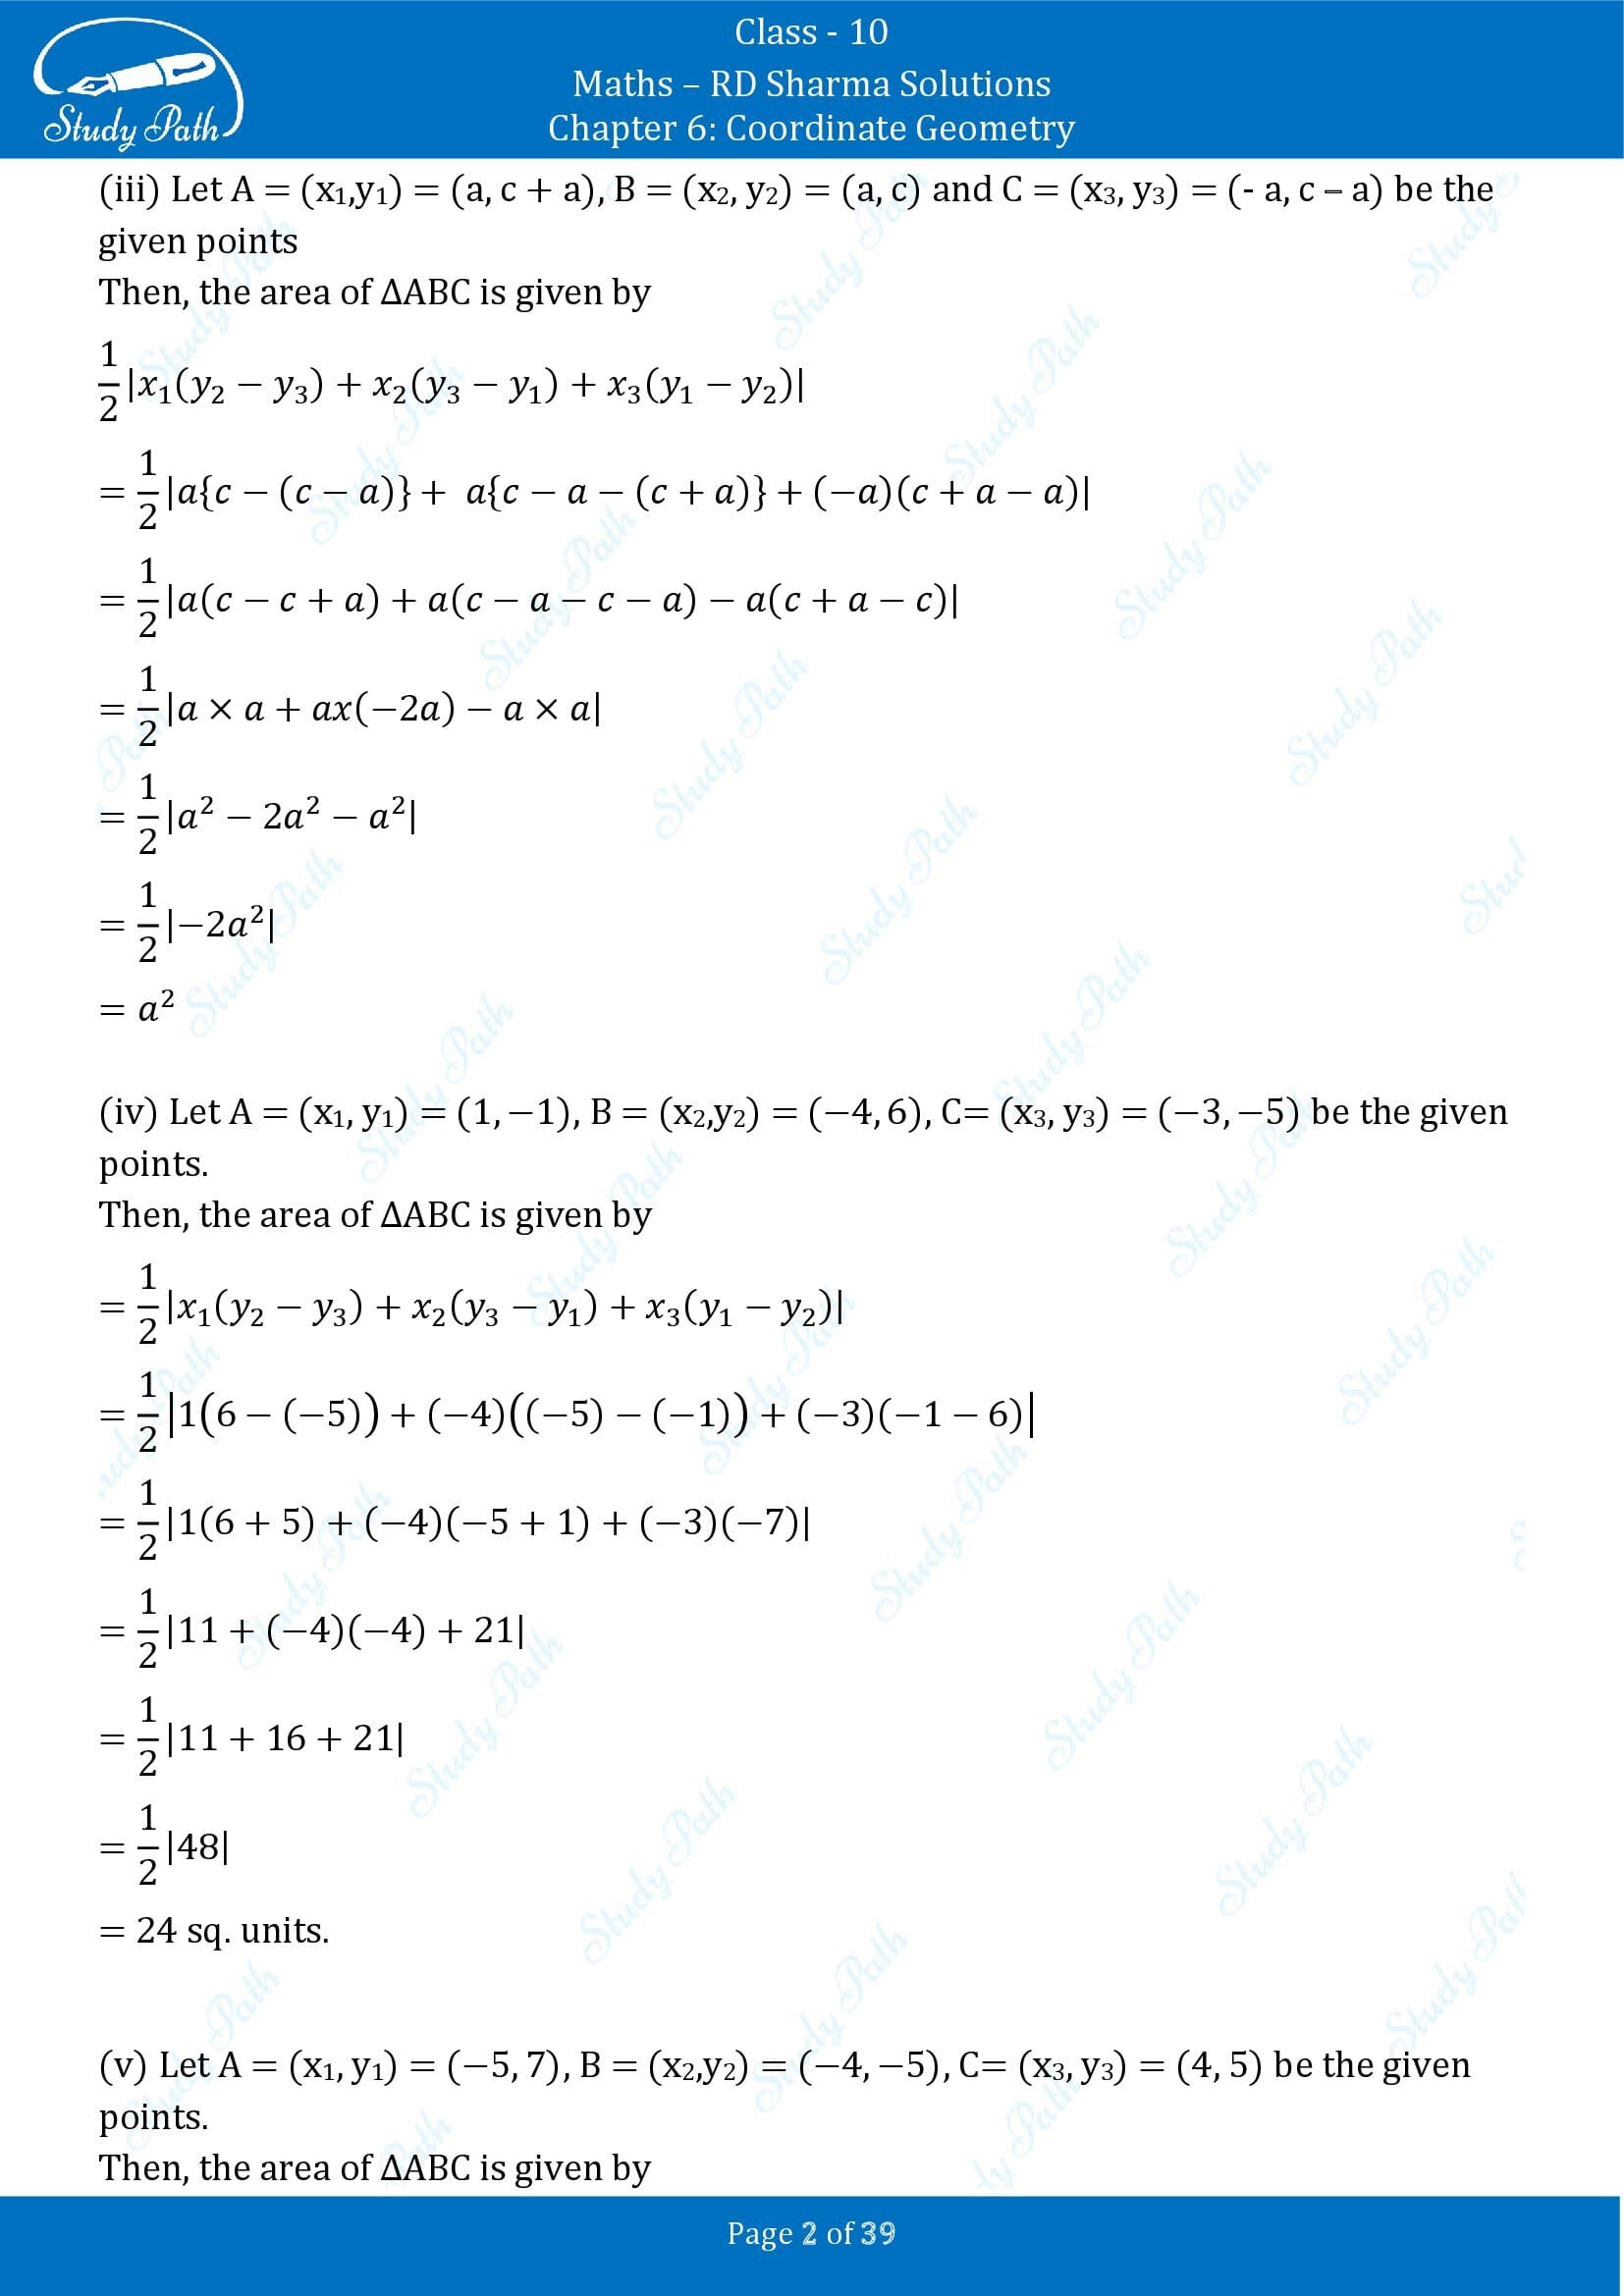 RD Sharma Solutions Class 10 Chapter 6 Coordinate Geometry Exercise 6.5 0002